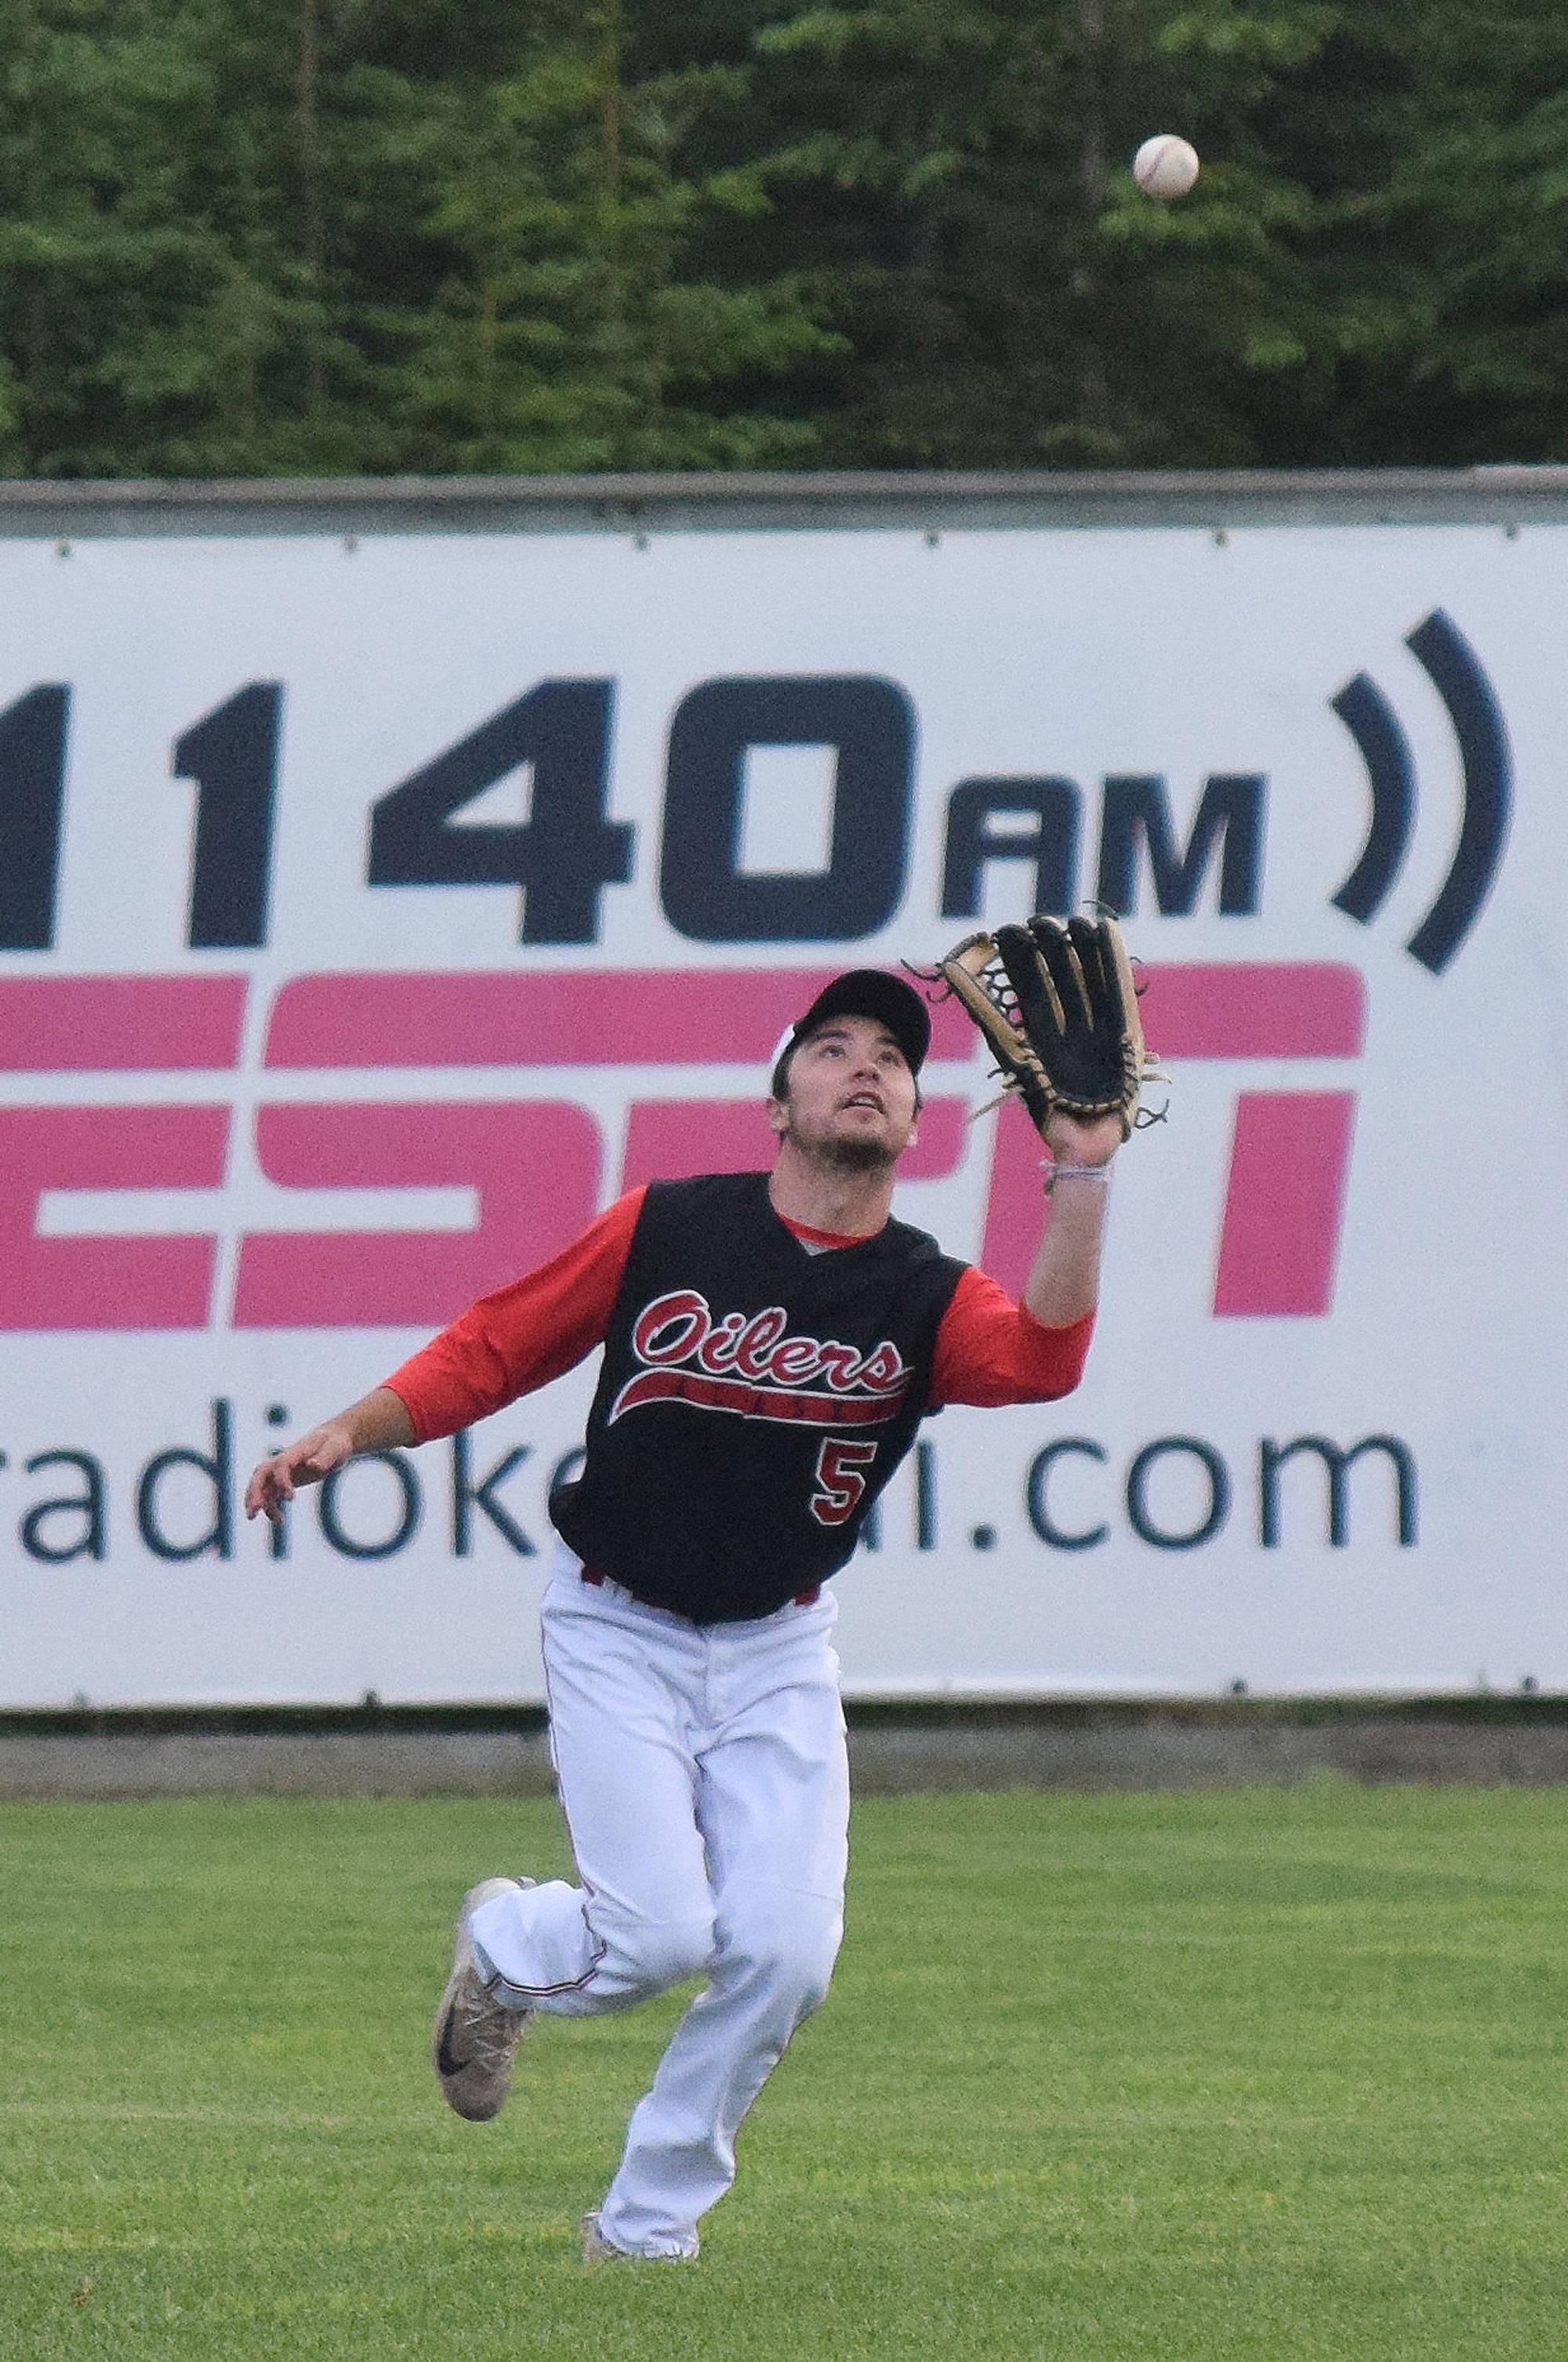 Peninsula Oilers outfielder Paul Kunst makes a catch Friday night against the Chugiak/Eagle River Chinooks at Coral Seymour Memorial Park in Kenai. (Photo by Joey Klecka/Peninsula Clarion)